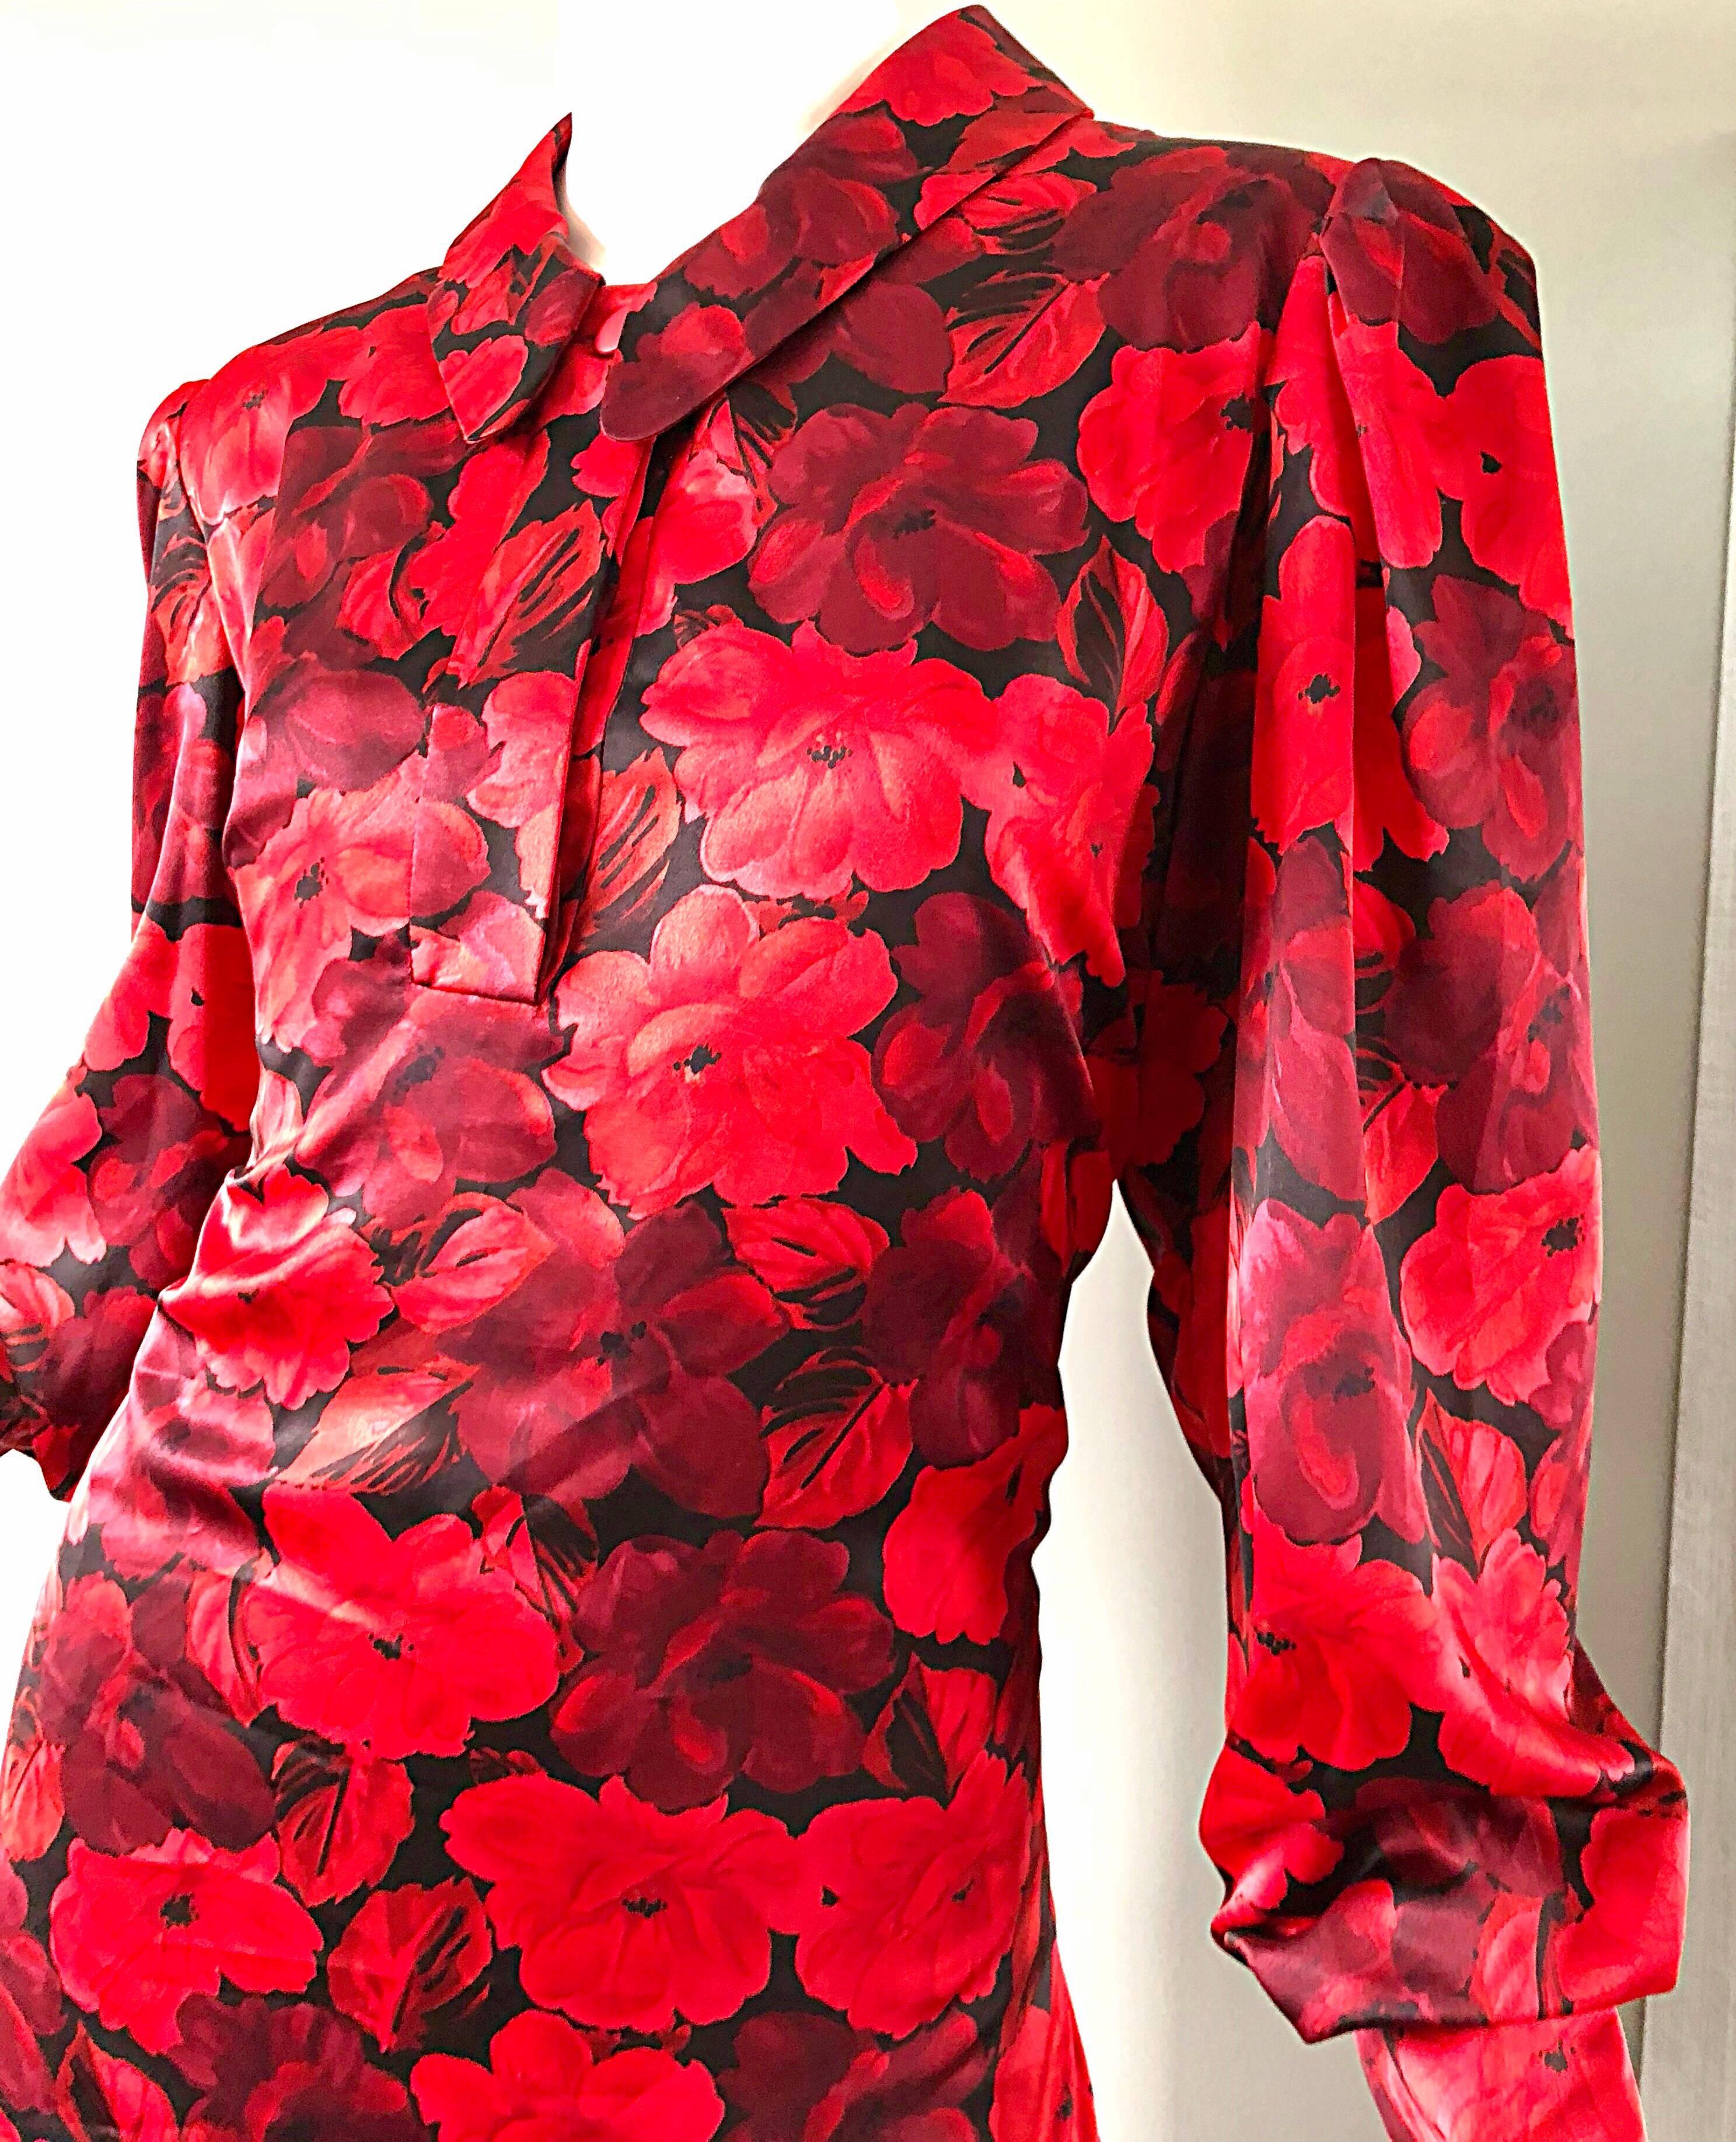 Vintage NIna Ricci Size 14 / 16 Red Black Flapper Style Flower Drop Waist Dress In Excellent Condition For Sale In San Diego, CA